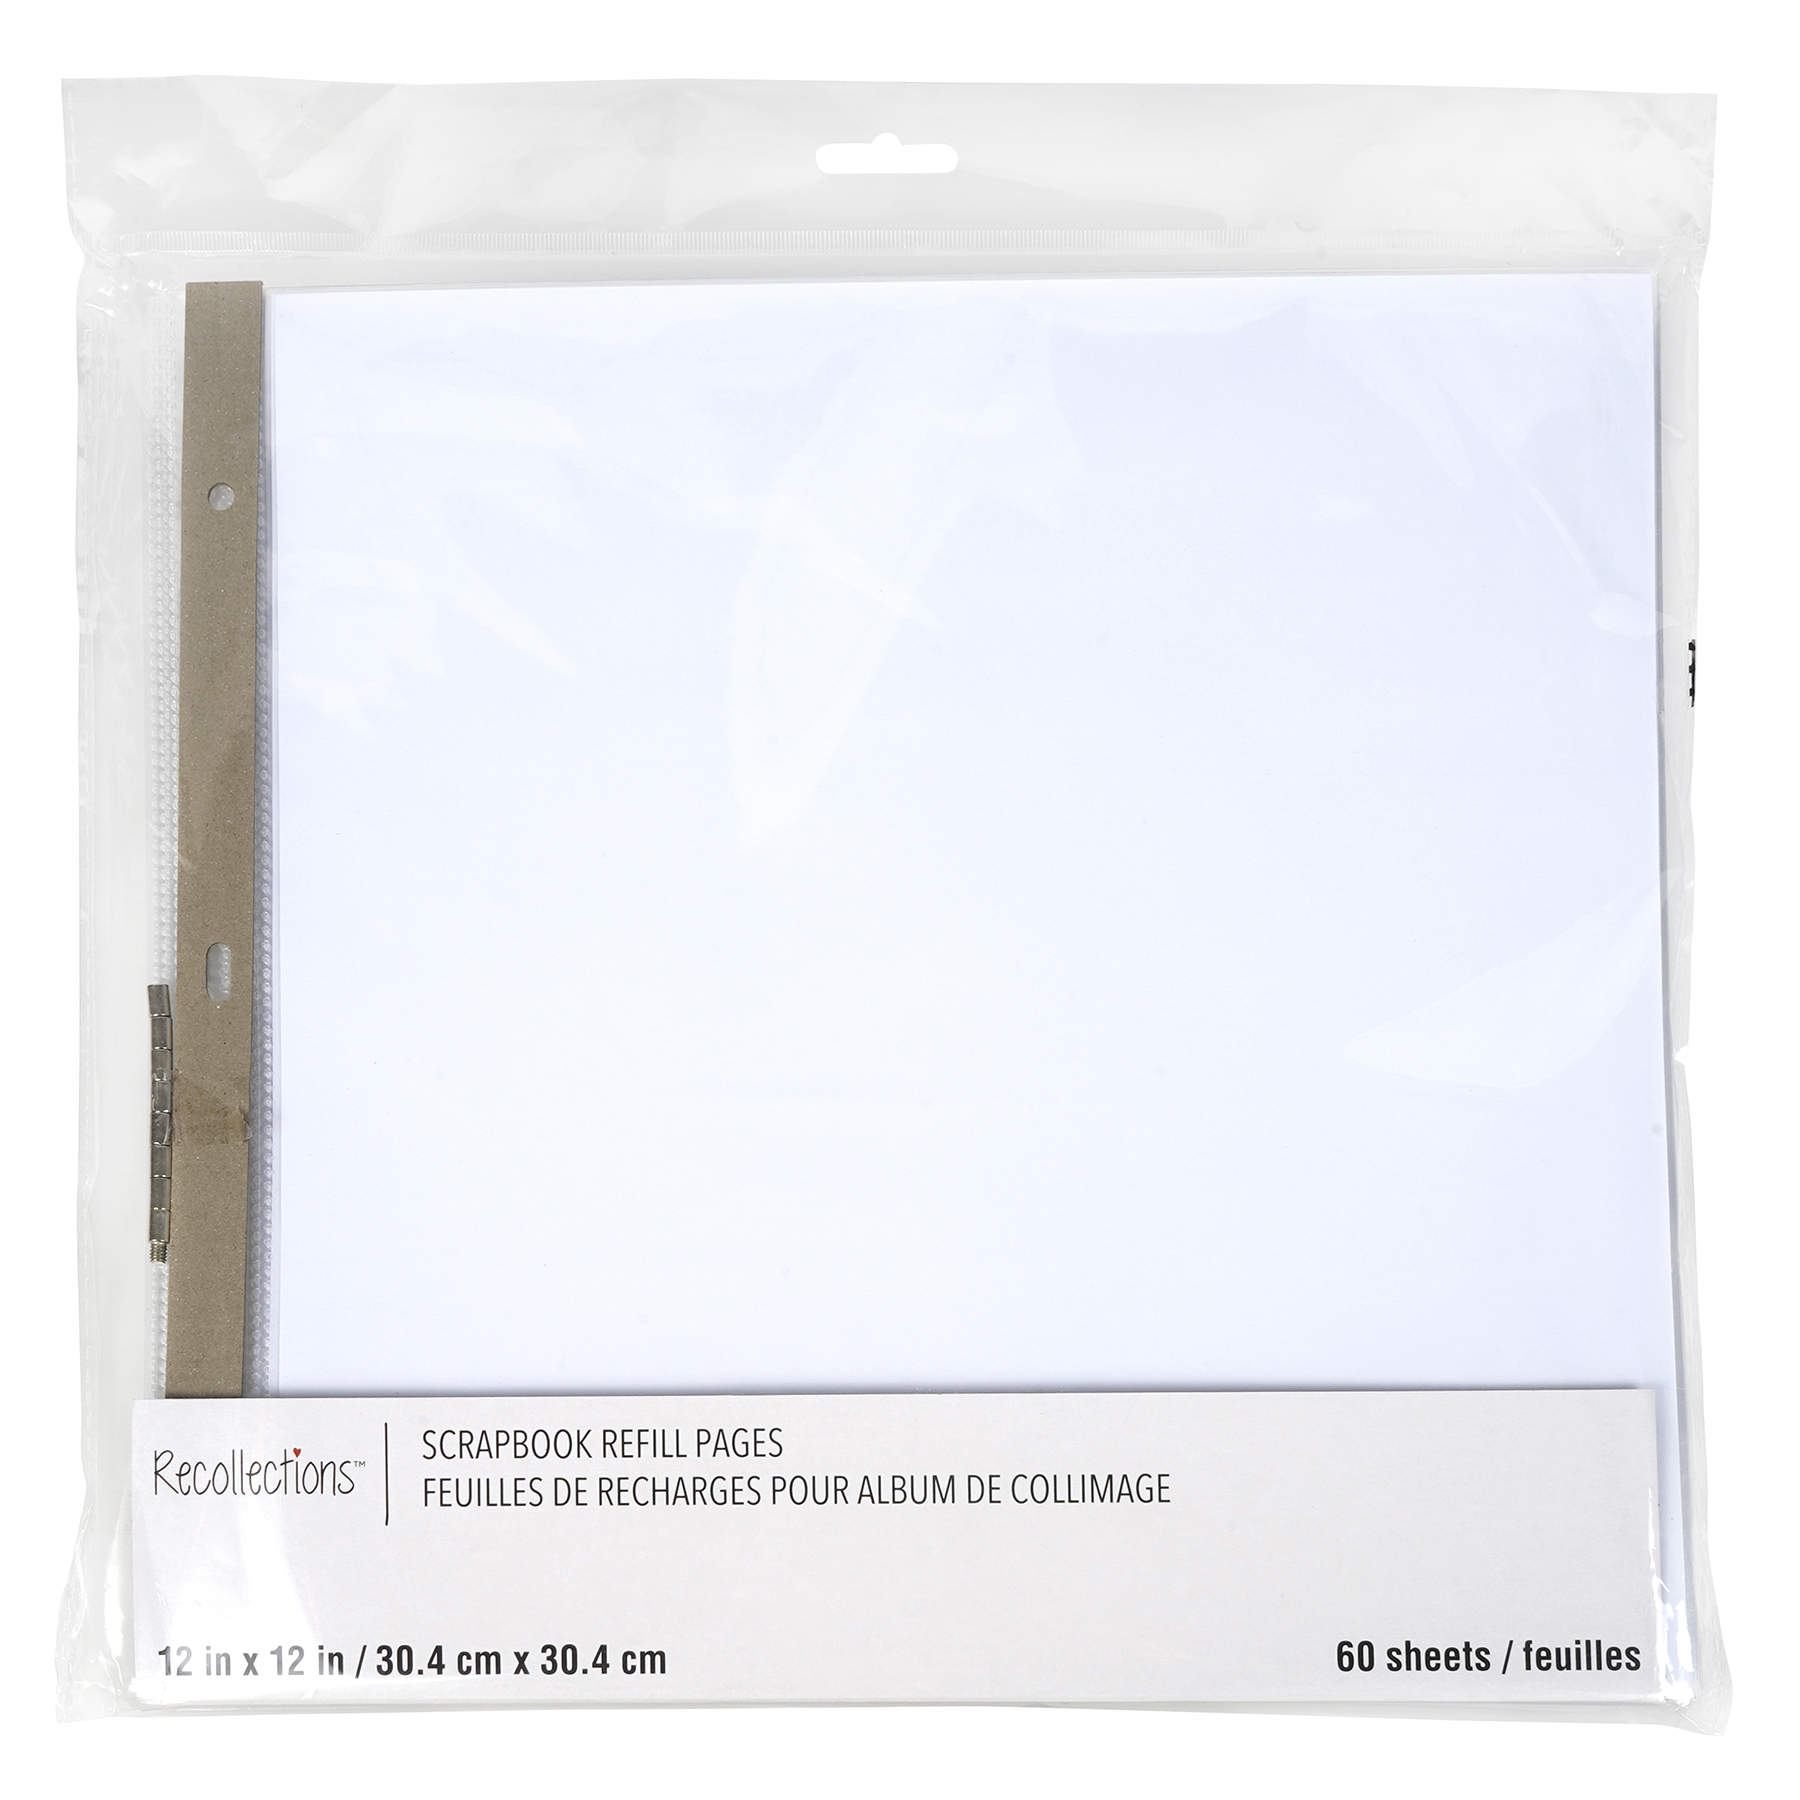 12 x 12 White Scrapbook Refill Pages by Recollections™, 60 Sheets